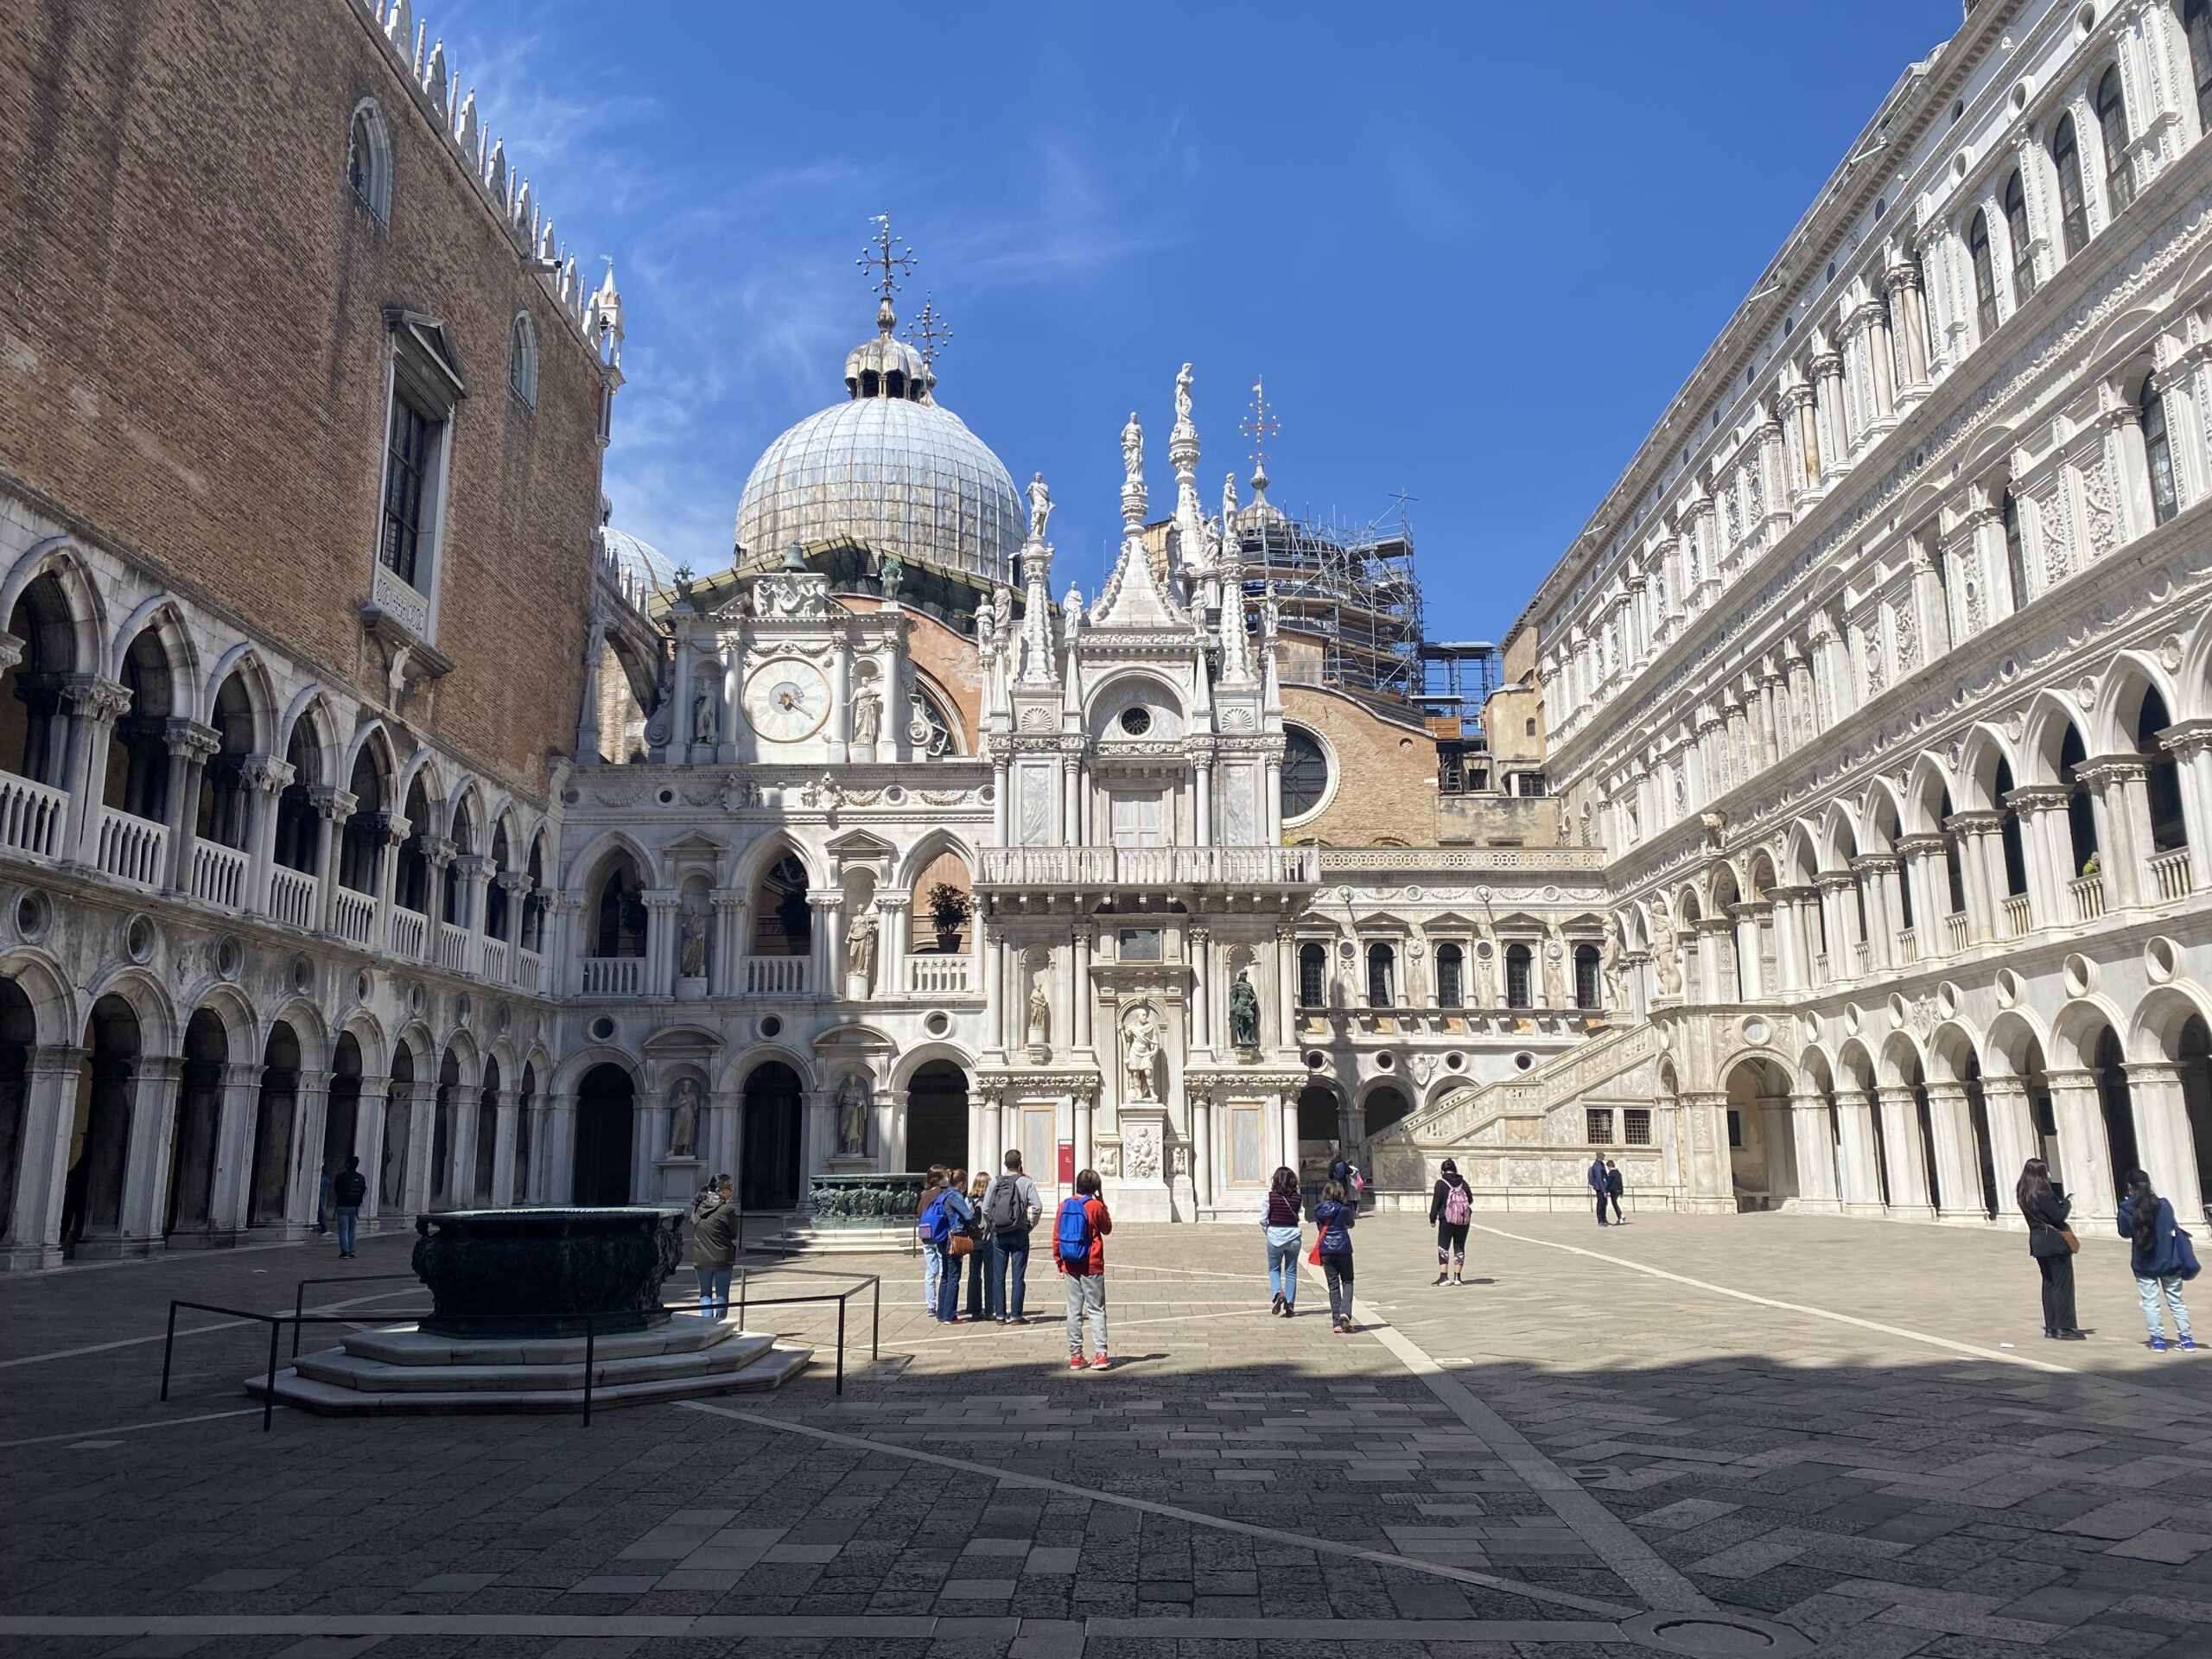 Interior courtyard of Doge's Palace in Venice Italy